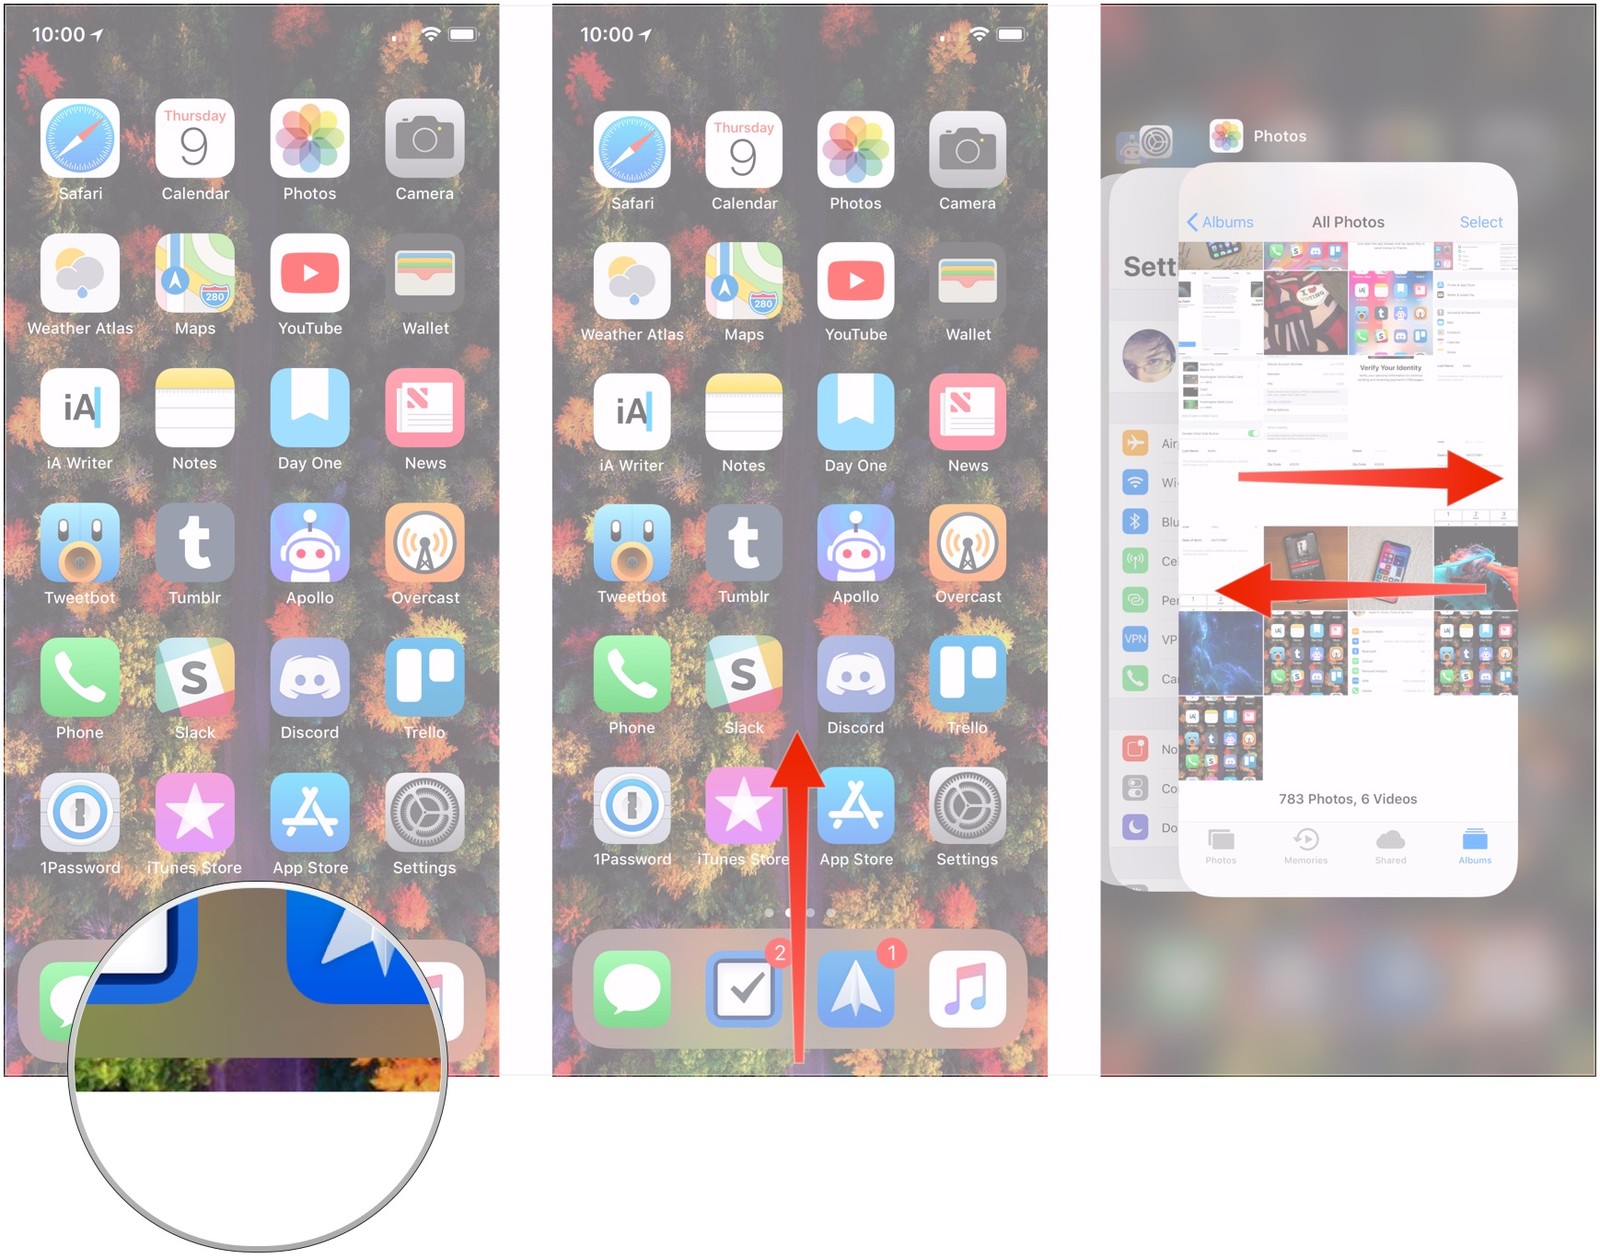 How to Use Multitasking And Fast App Switching on the iPhone X?